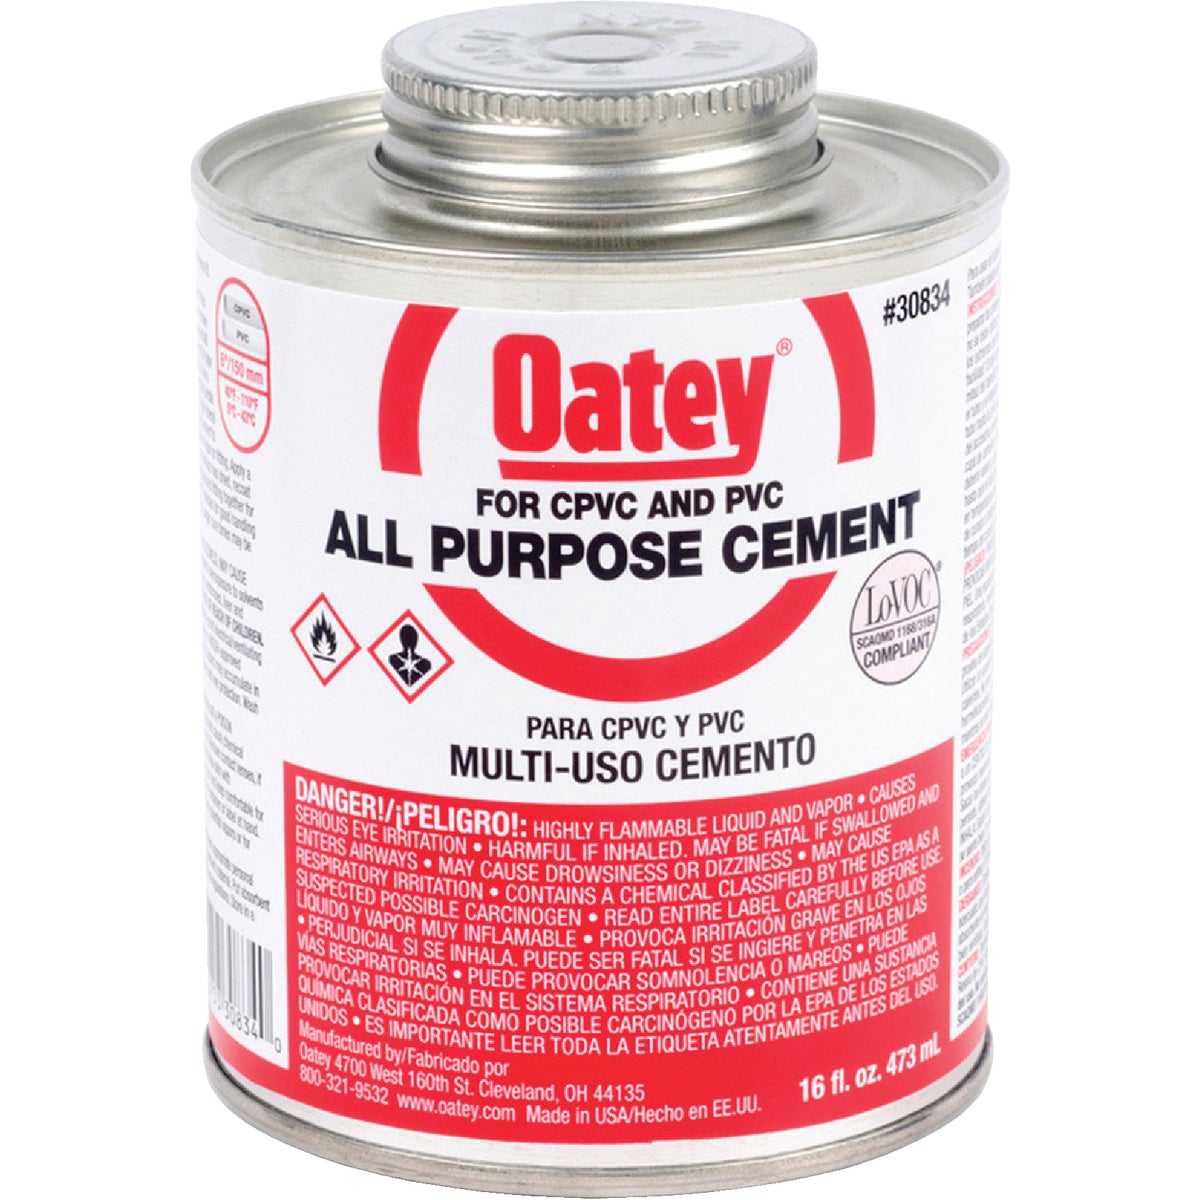 Oatey 16 Oz. Heavy Bodied Clear Multi Purpose Cement CPVC and PVC